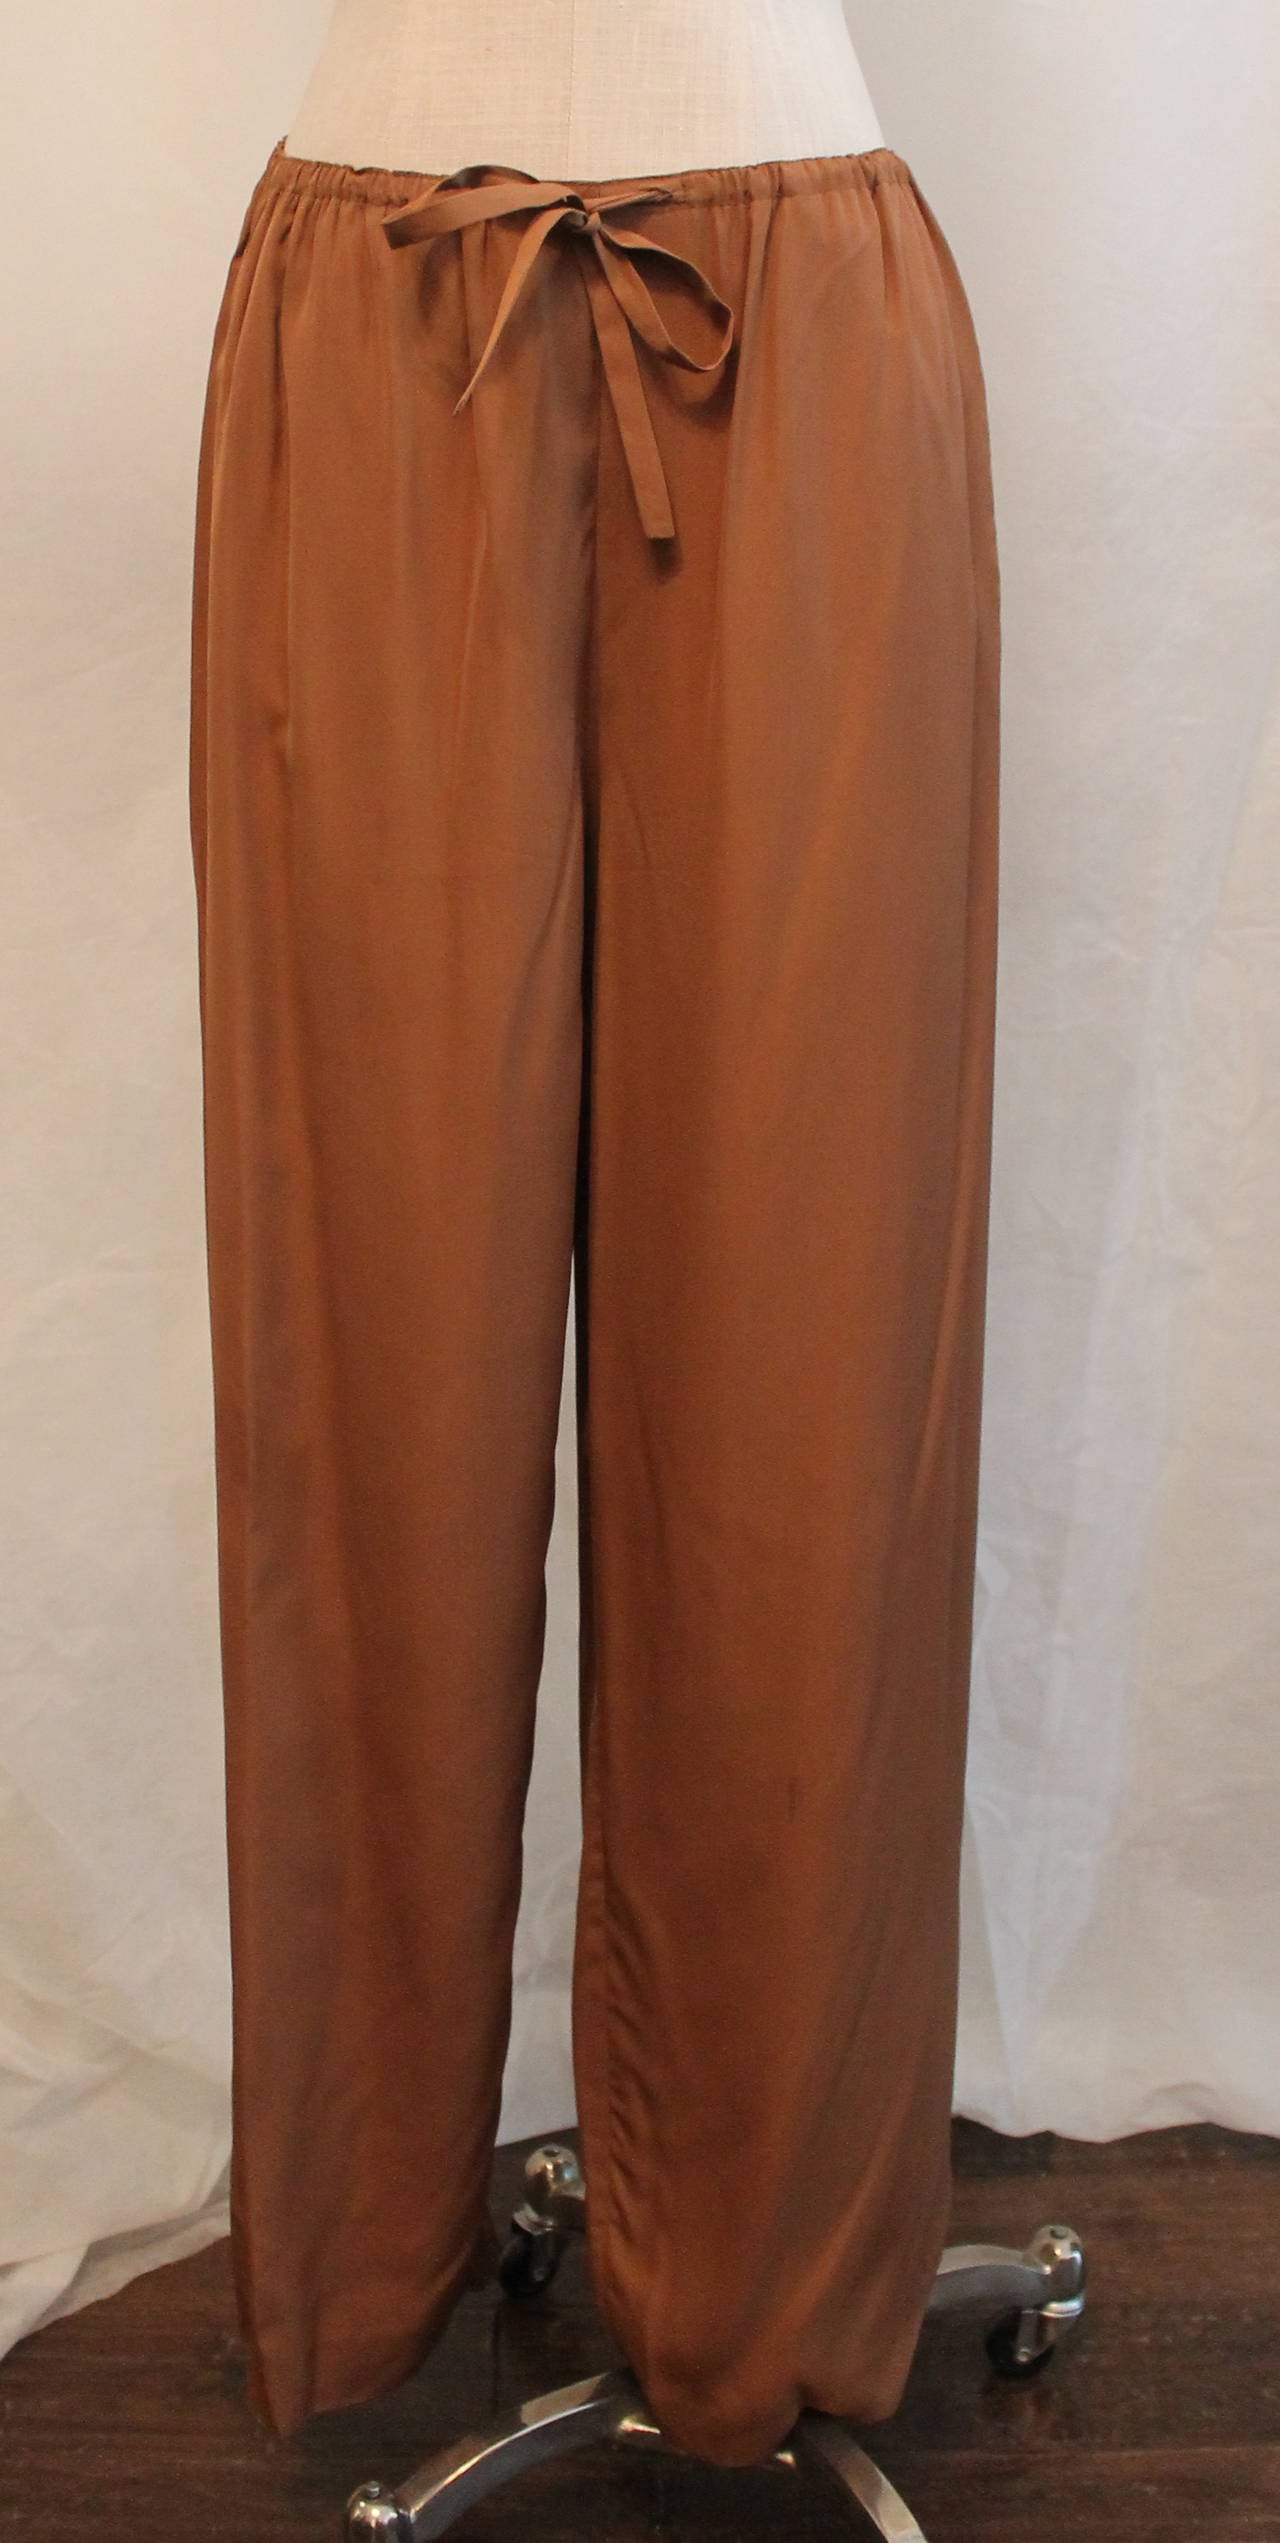 Jean Paul Gaultier 2000s Brown Drawstring Palazzo Pants with Scrunch Pockets - 8. These pants are in very good condition with light wear. The scrunch pockets are on the back and there are 2 normal side pockets. 

Measurements:
Waist-